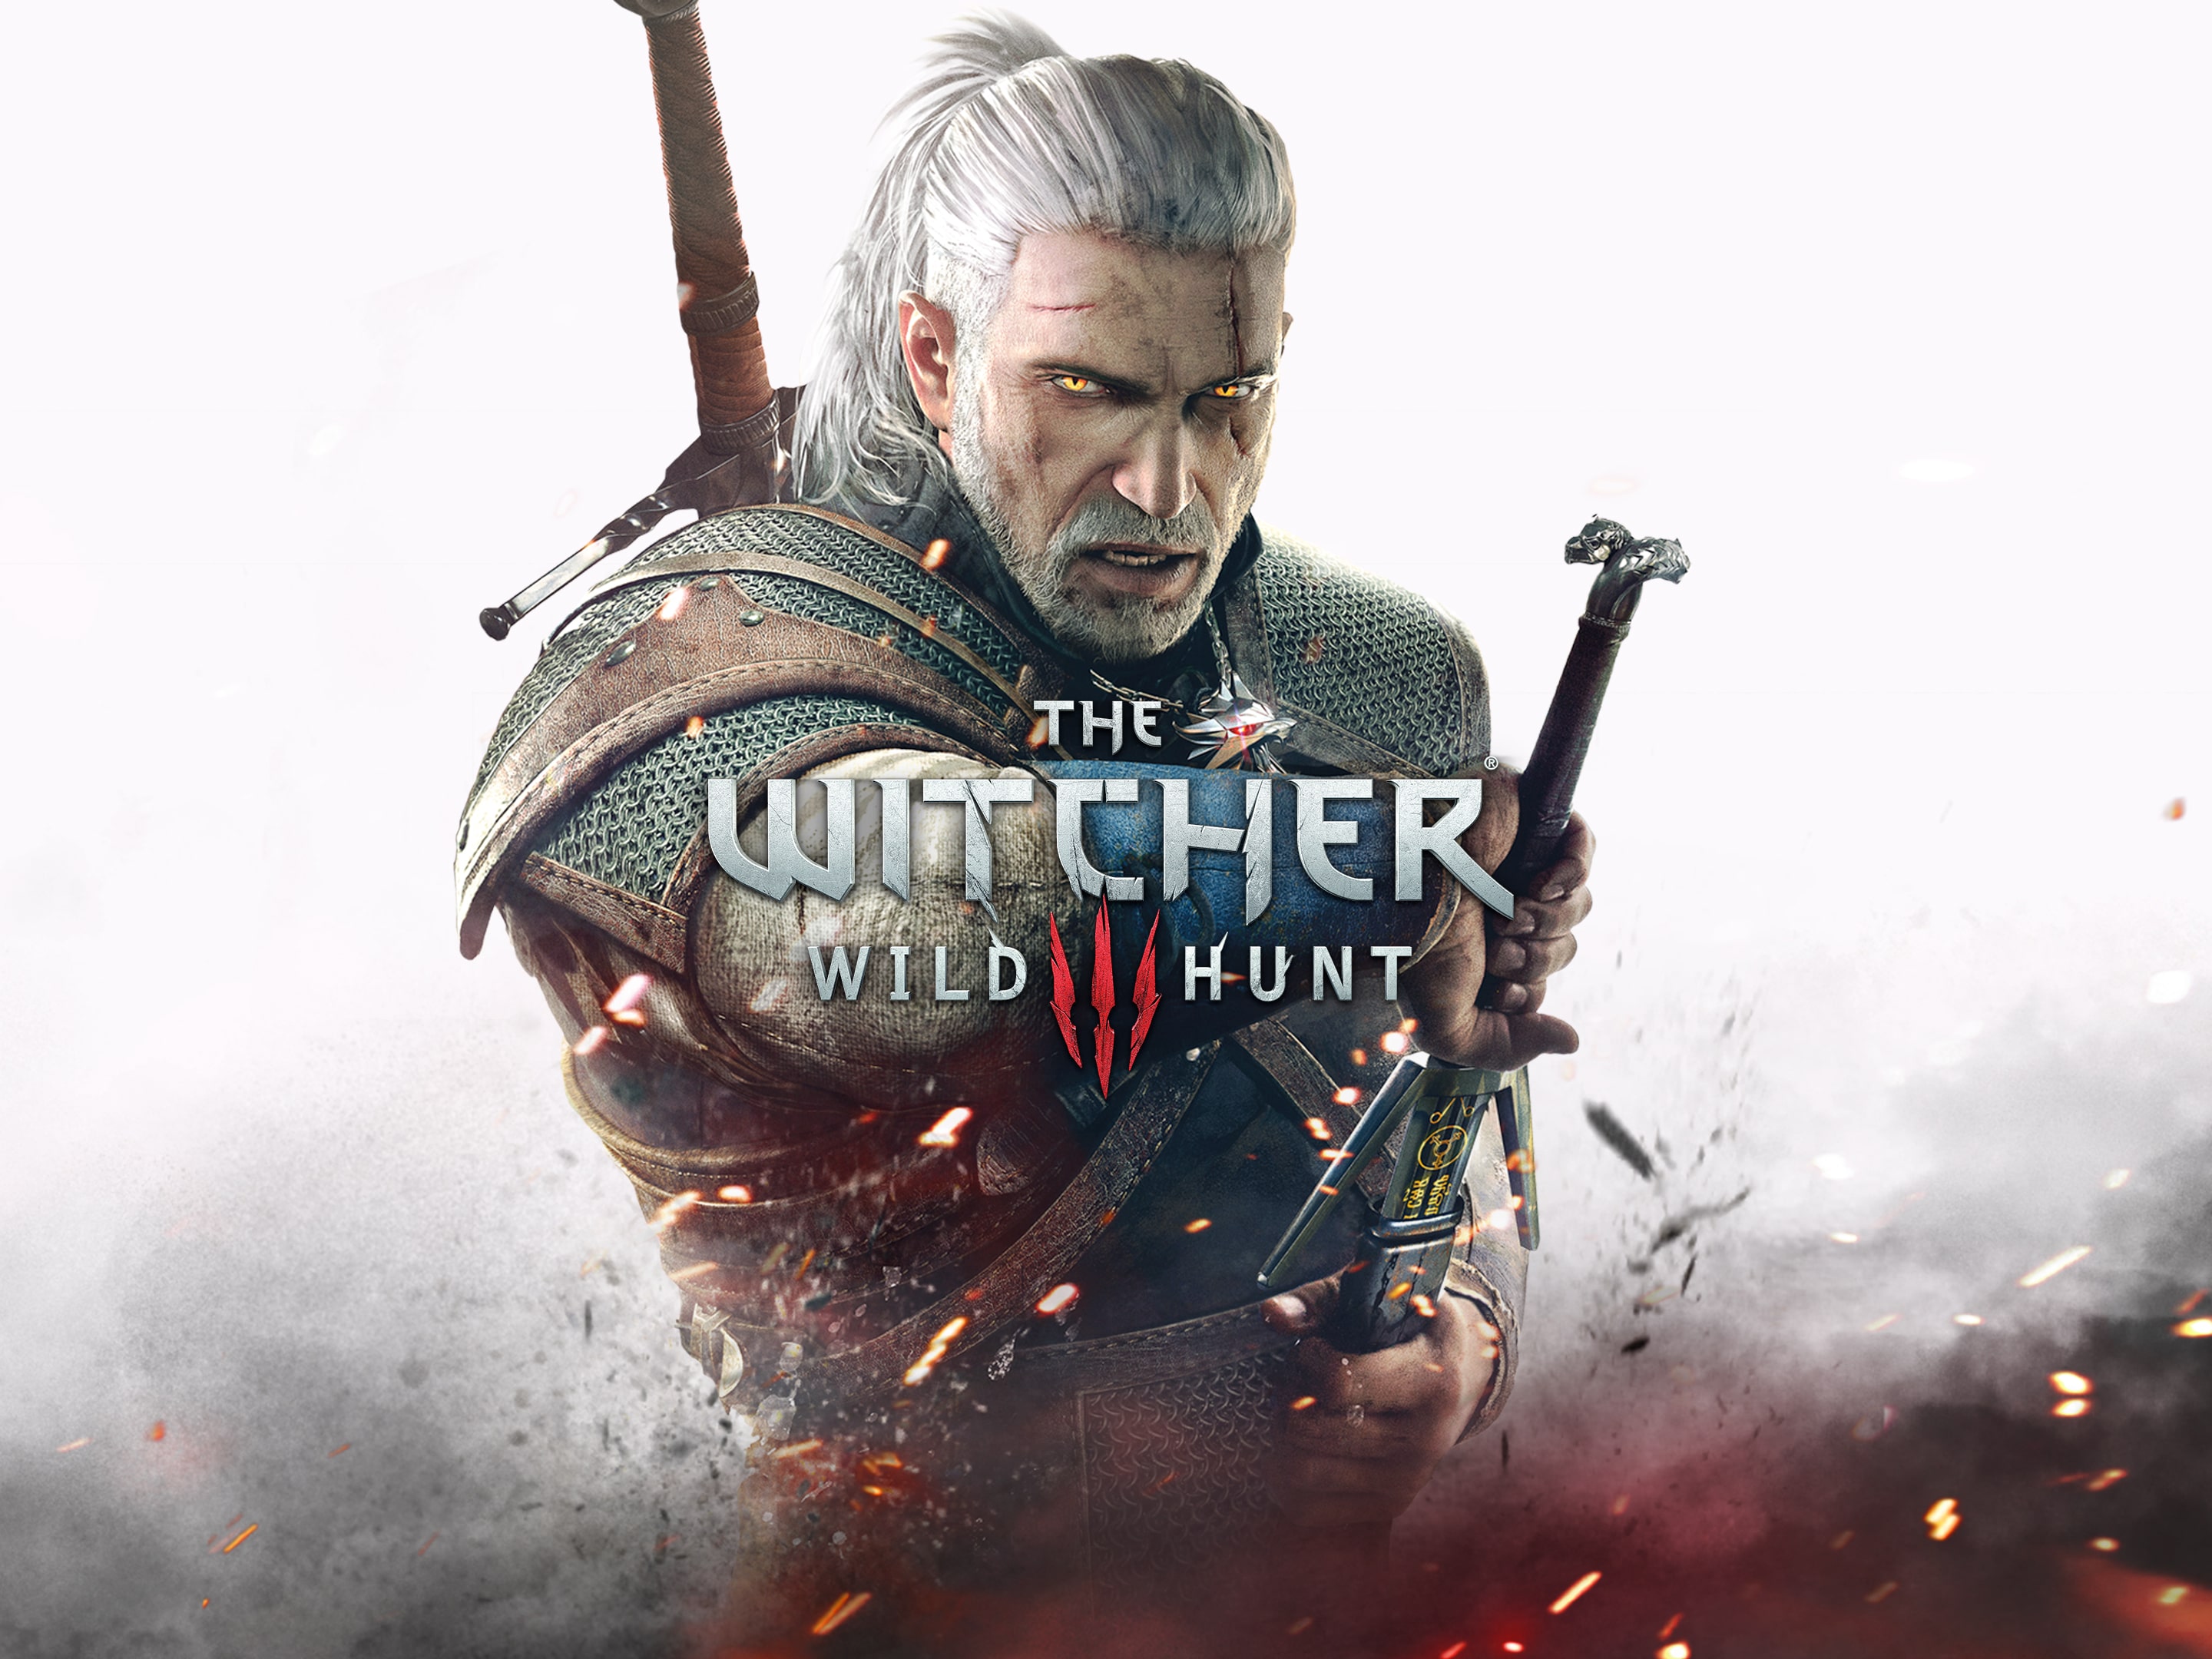 witcher 3 new game plus armor